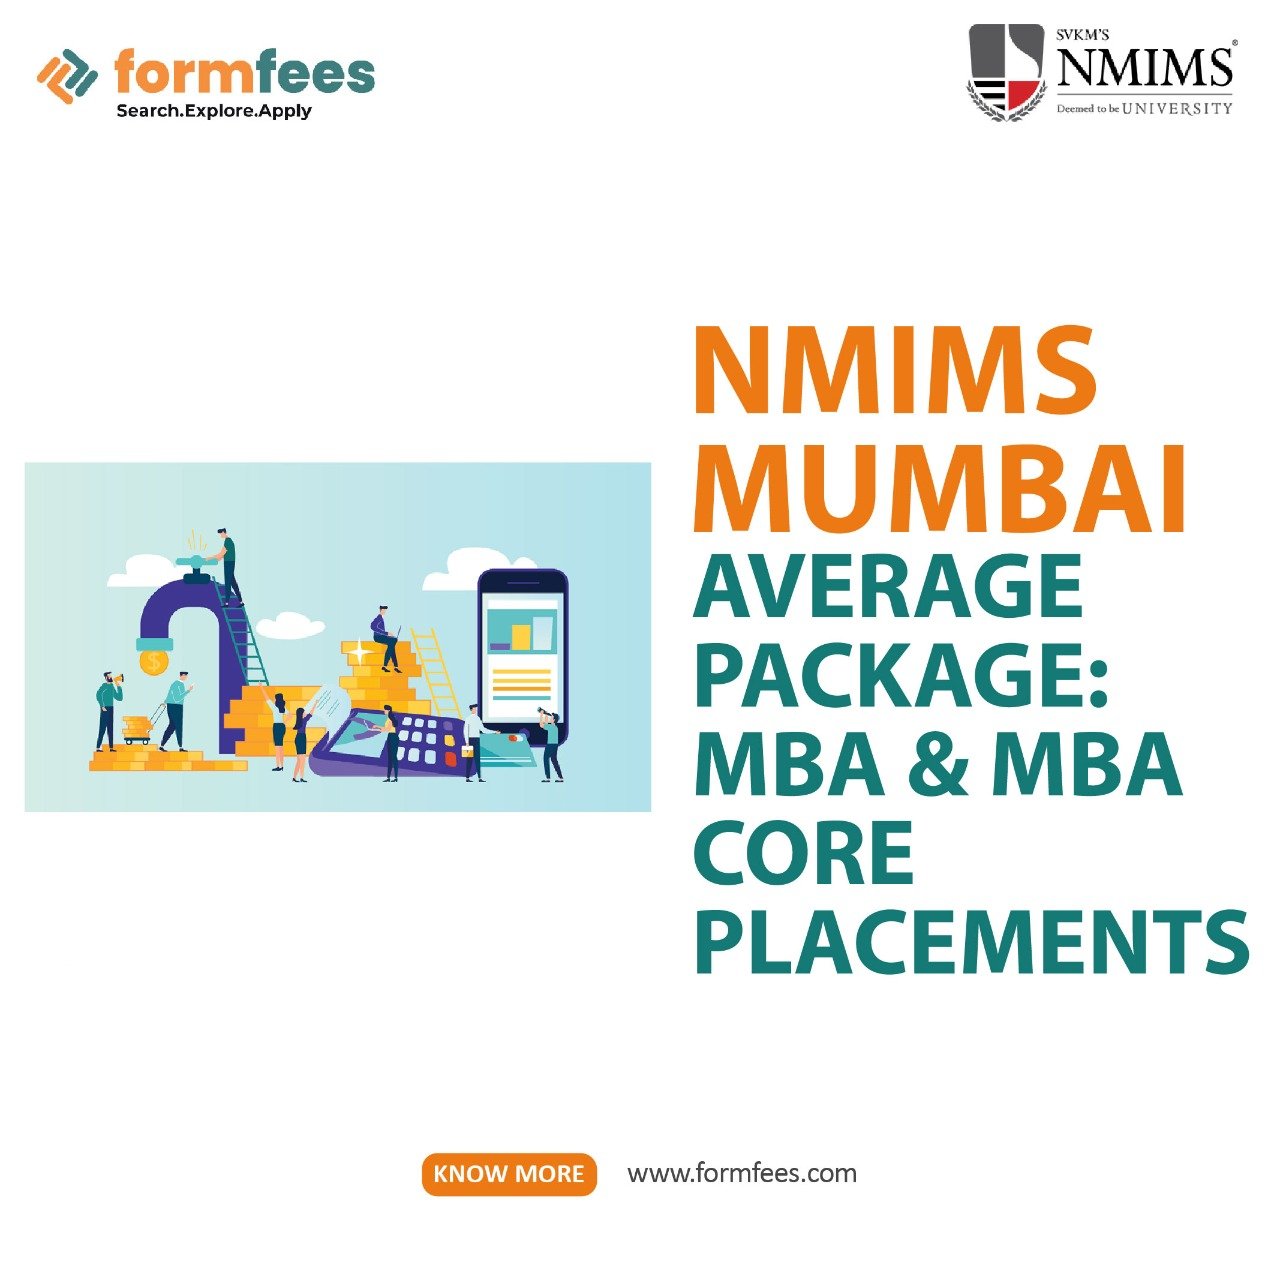 nmims-mumbai-average-package-mba-mba-core-placements